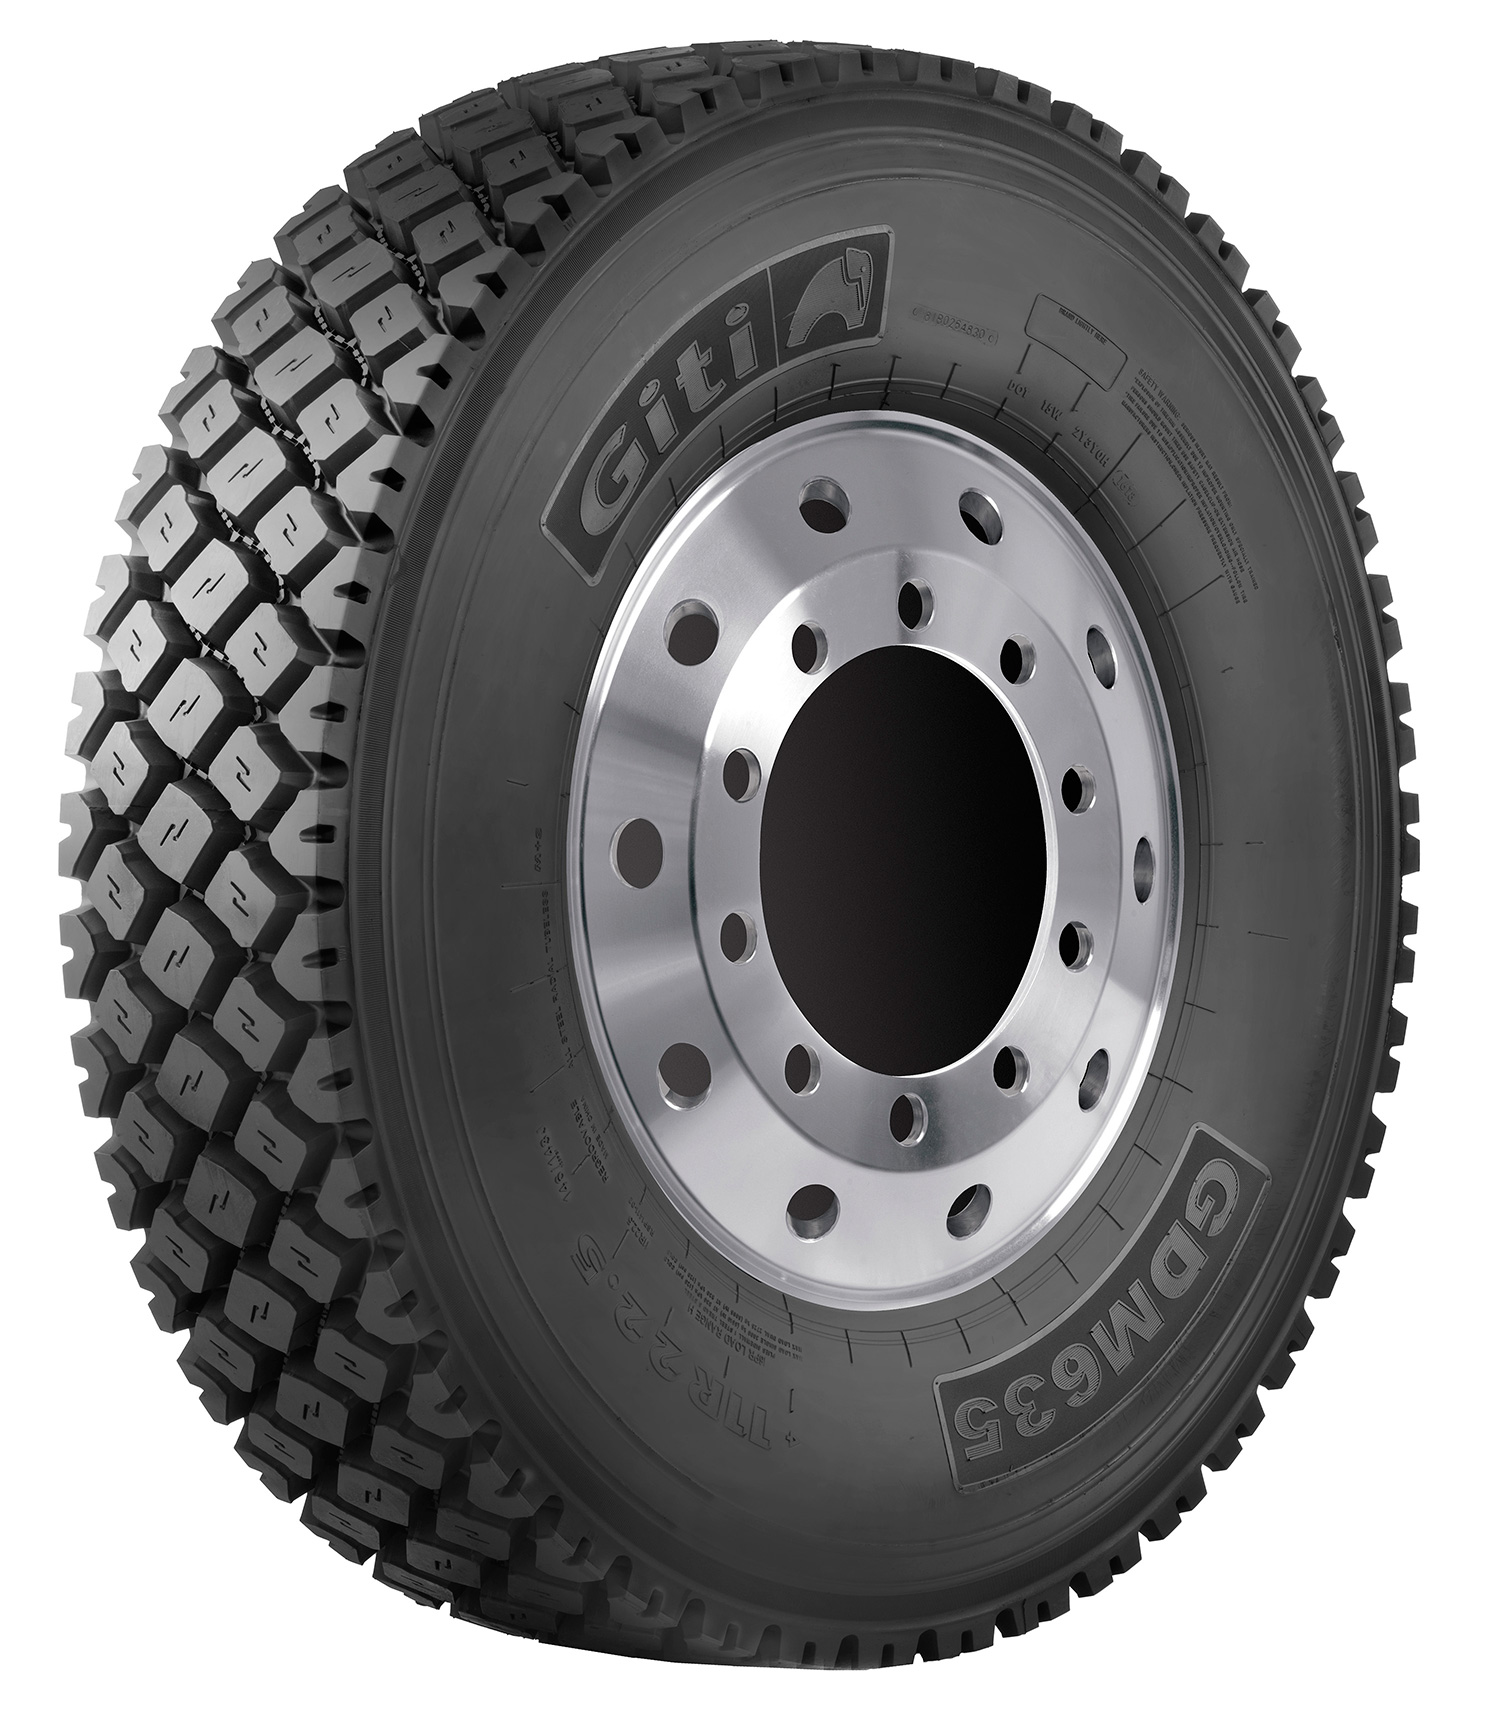 GAM635 Drive Position Mixed Service Truck Tire